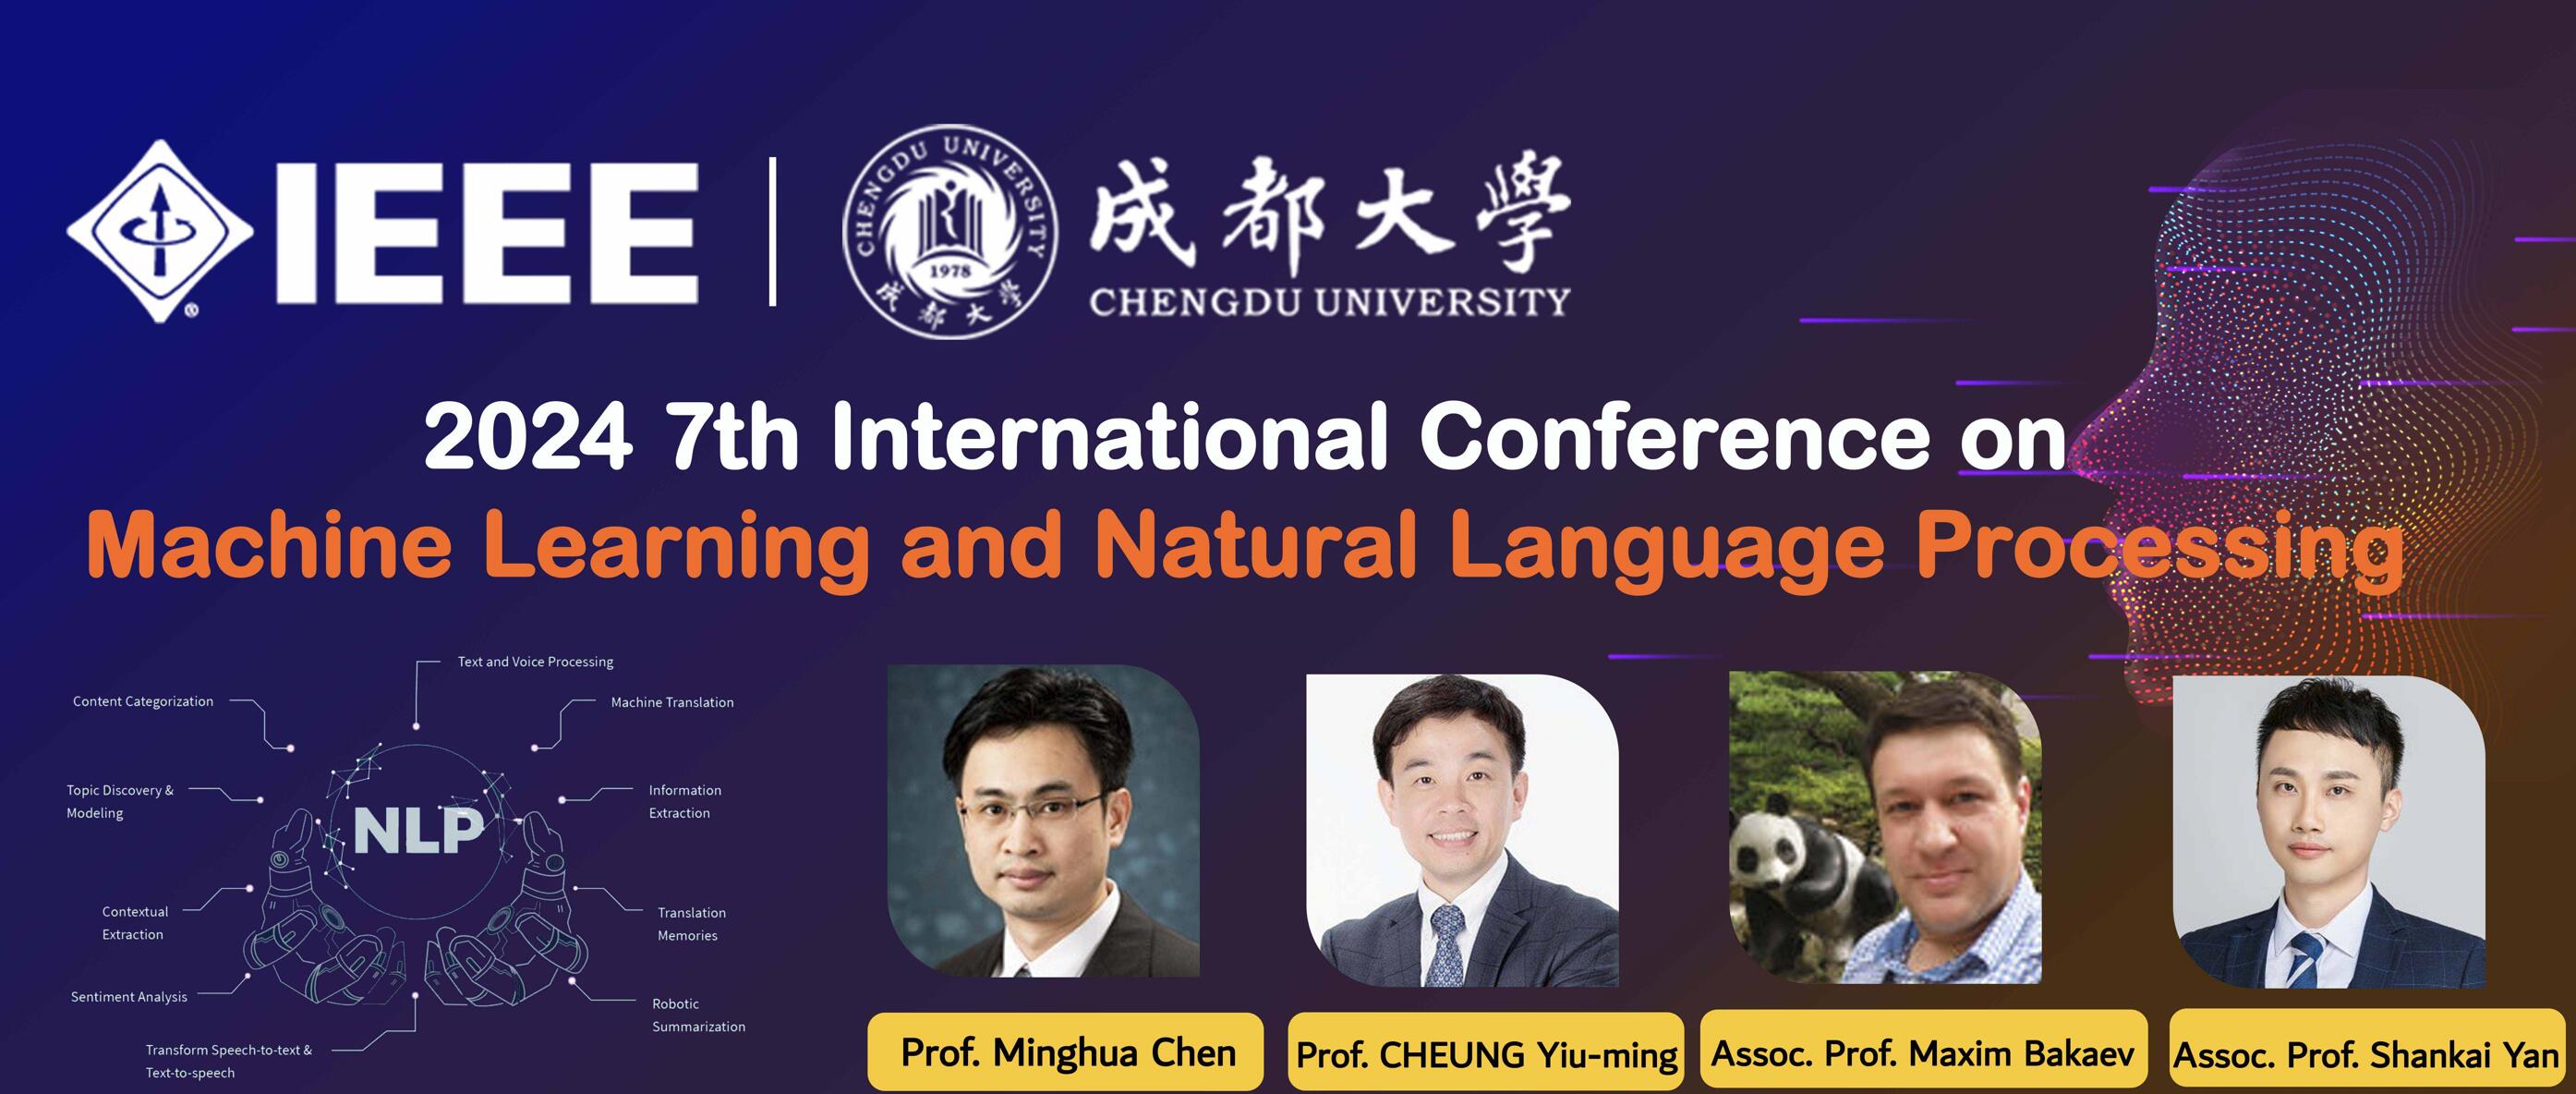 2024 7th International Conference on Machine Learning and Natural Language Processing (MLNLP 2024), Chengdu, Sichuan, China